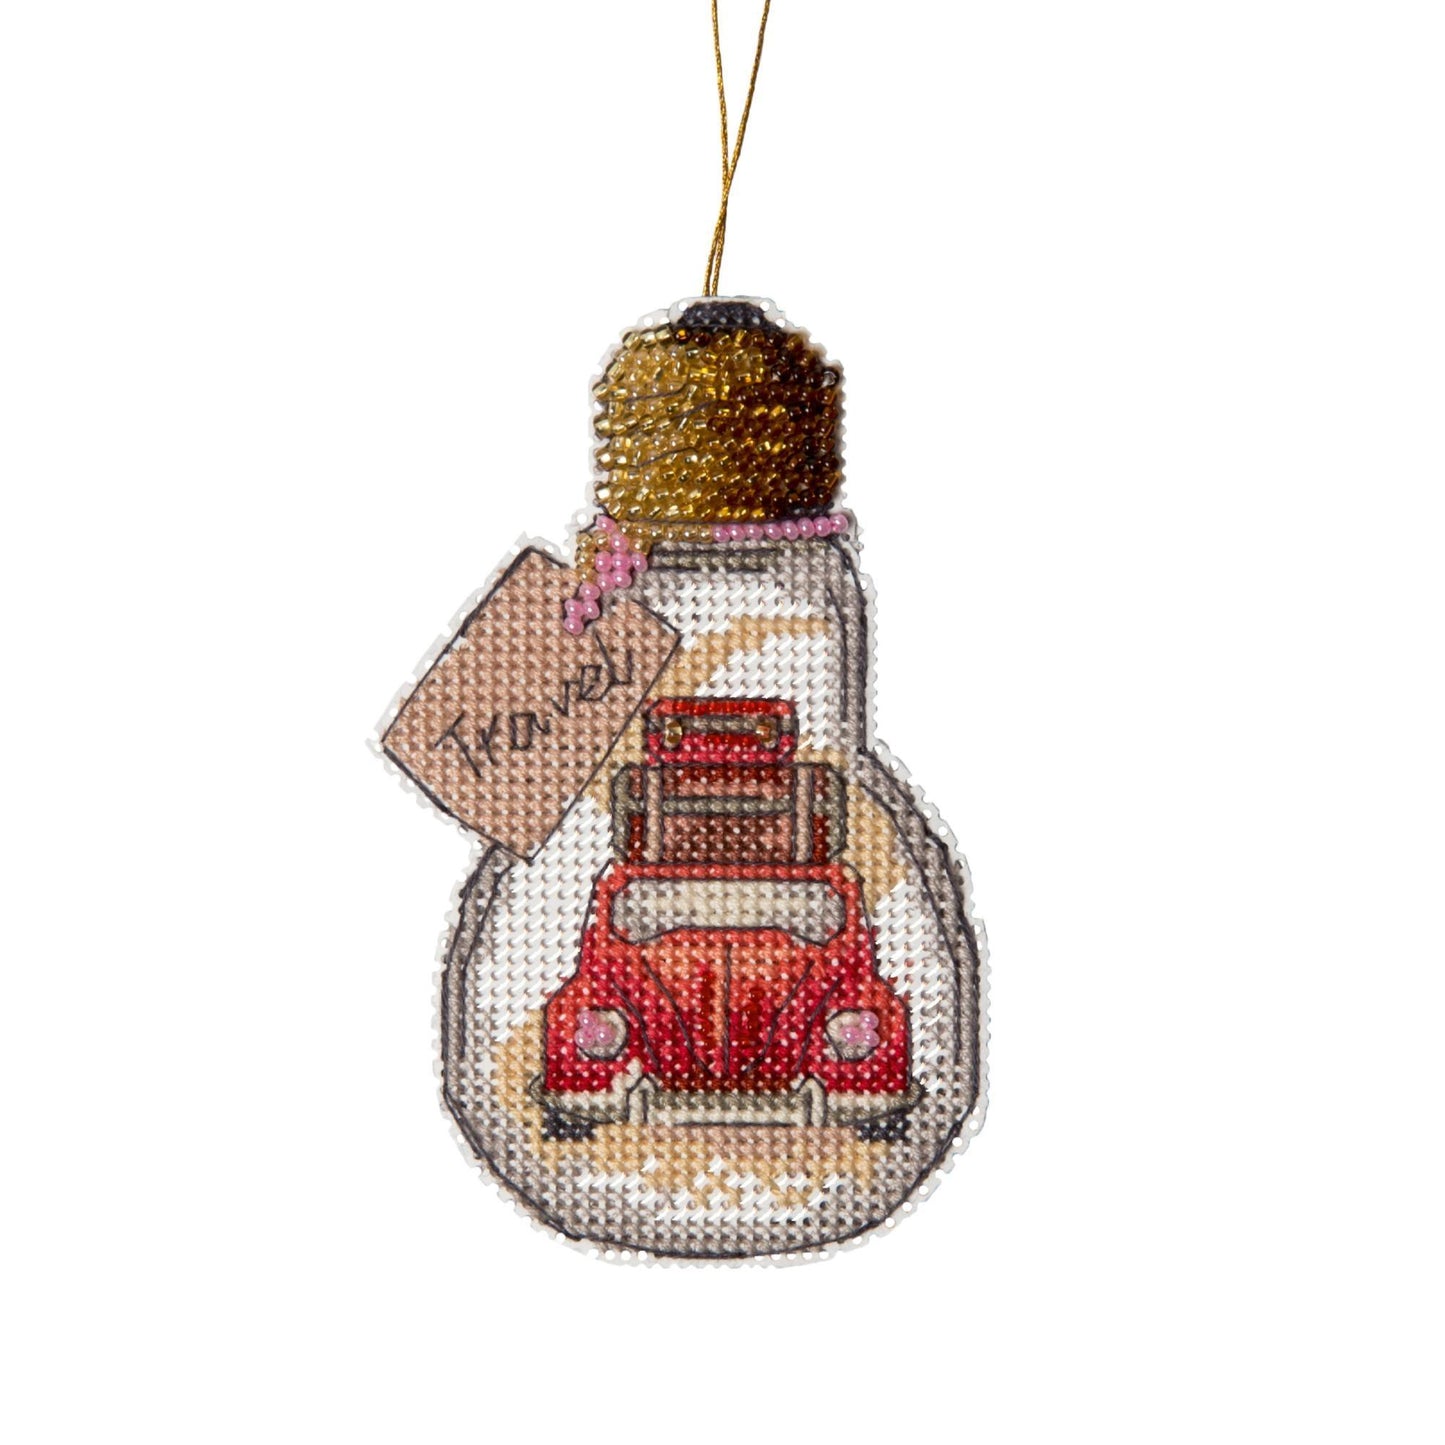 RED CAR "Travel series", Counted Cross-Stitch Kit, 14 count plastic canvas, size 6 x 11 cm, CRYSTAL ART (T-84) - Leo Hobby